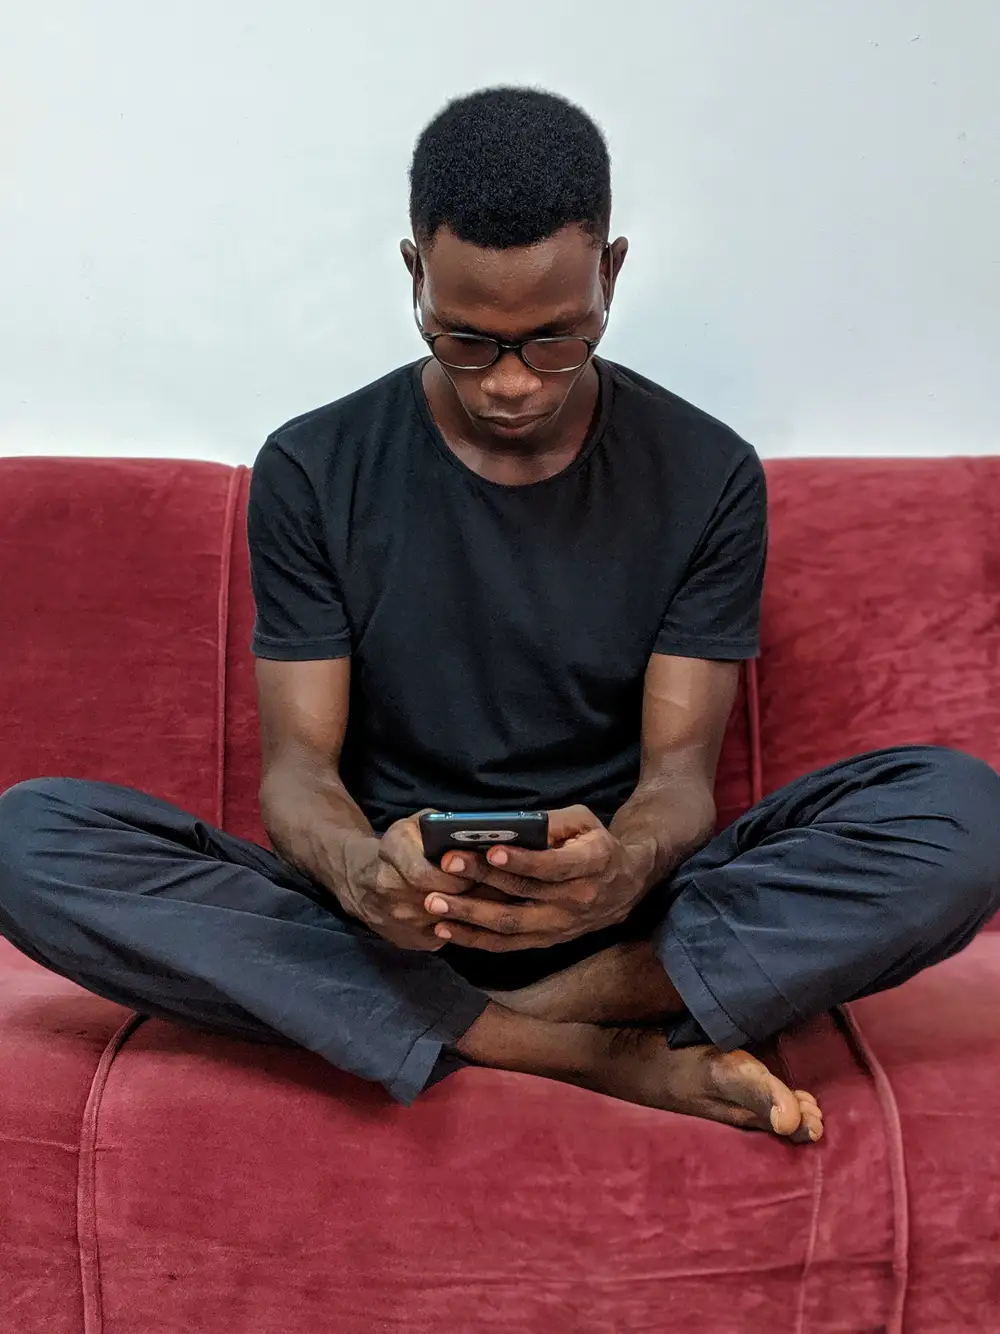 man sitting on couch while holding a phone